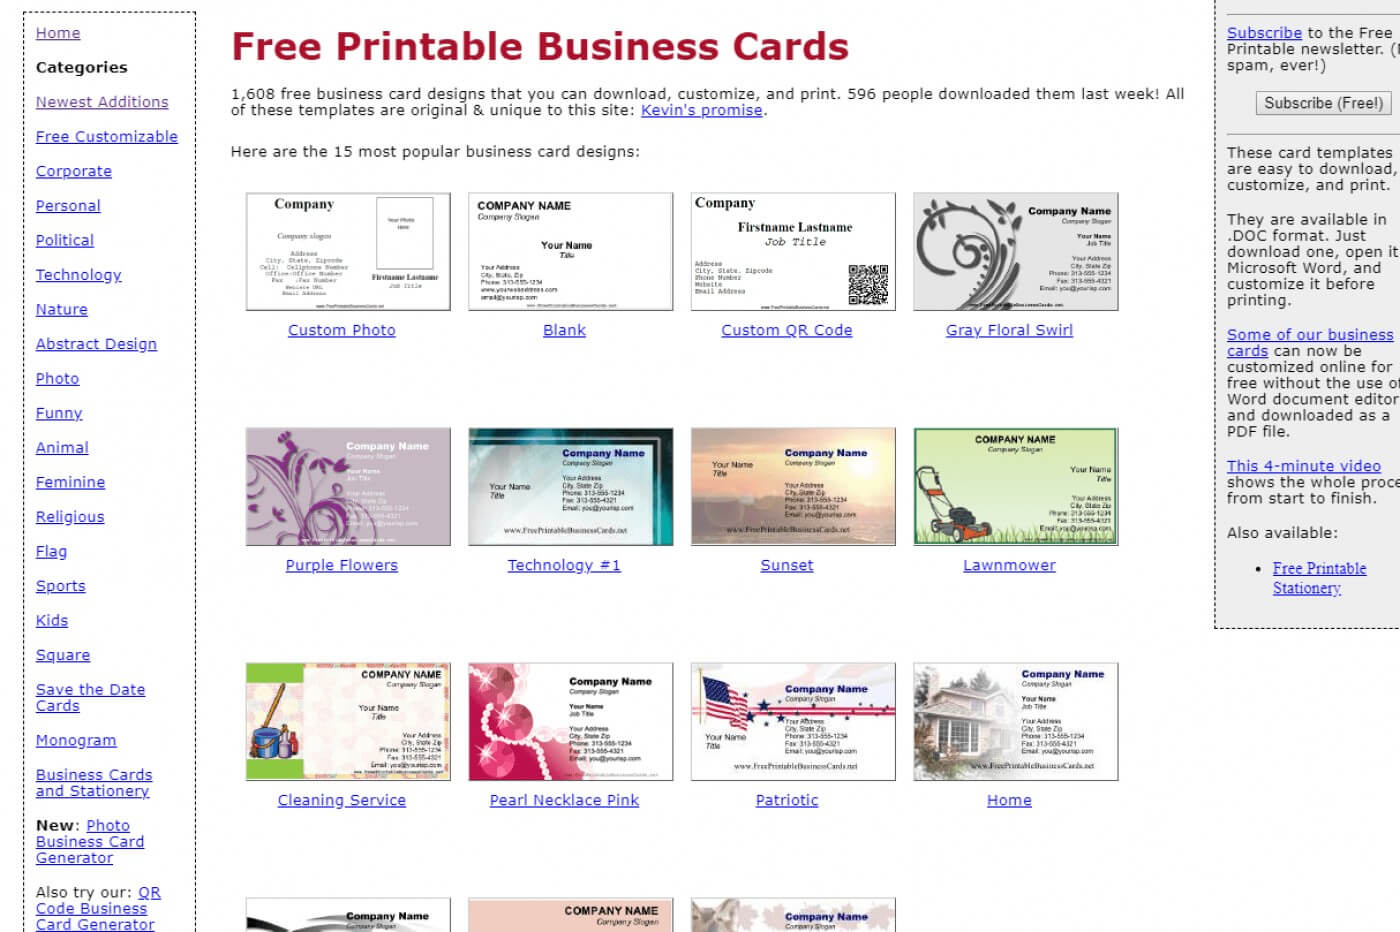 026 Free Printable Business Cards Blank Card Template With Word 2013 Business Card Template